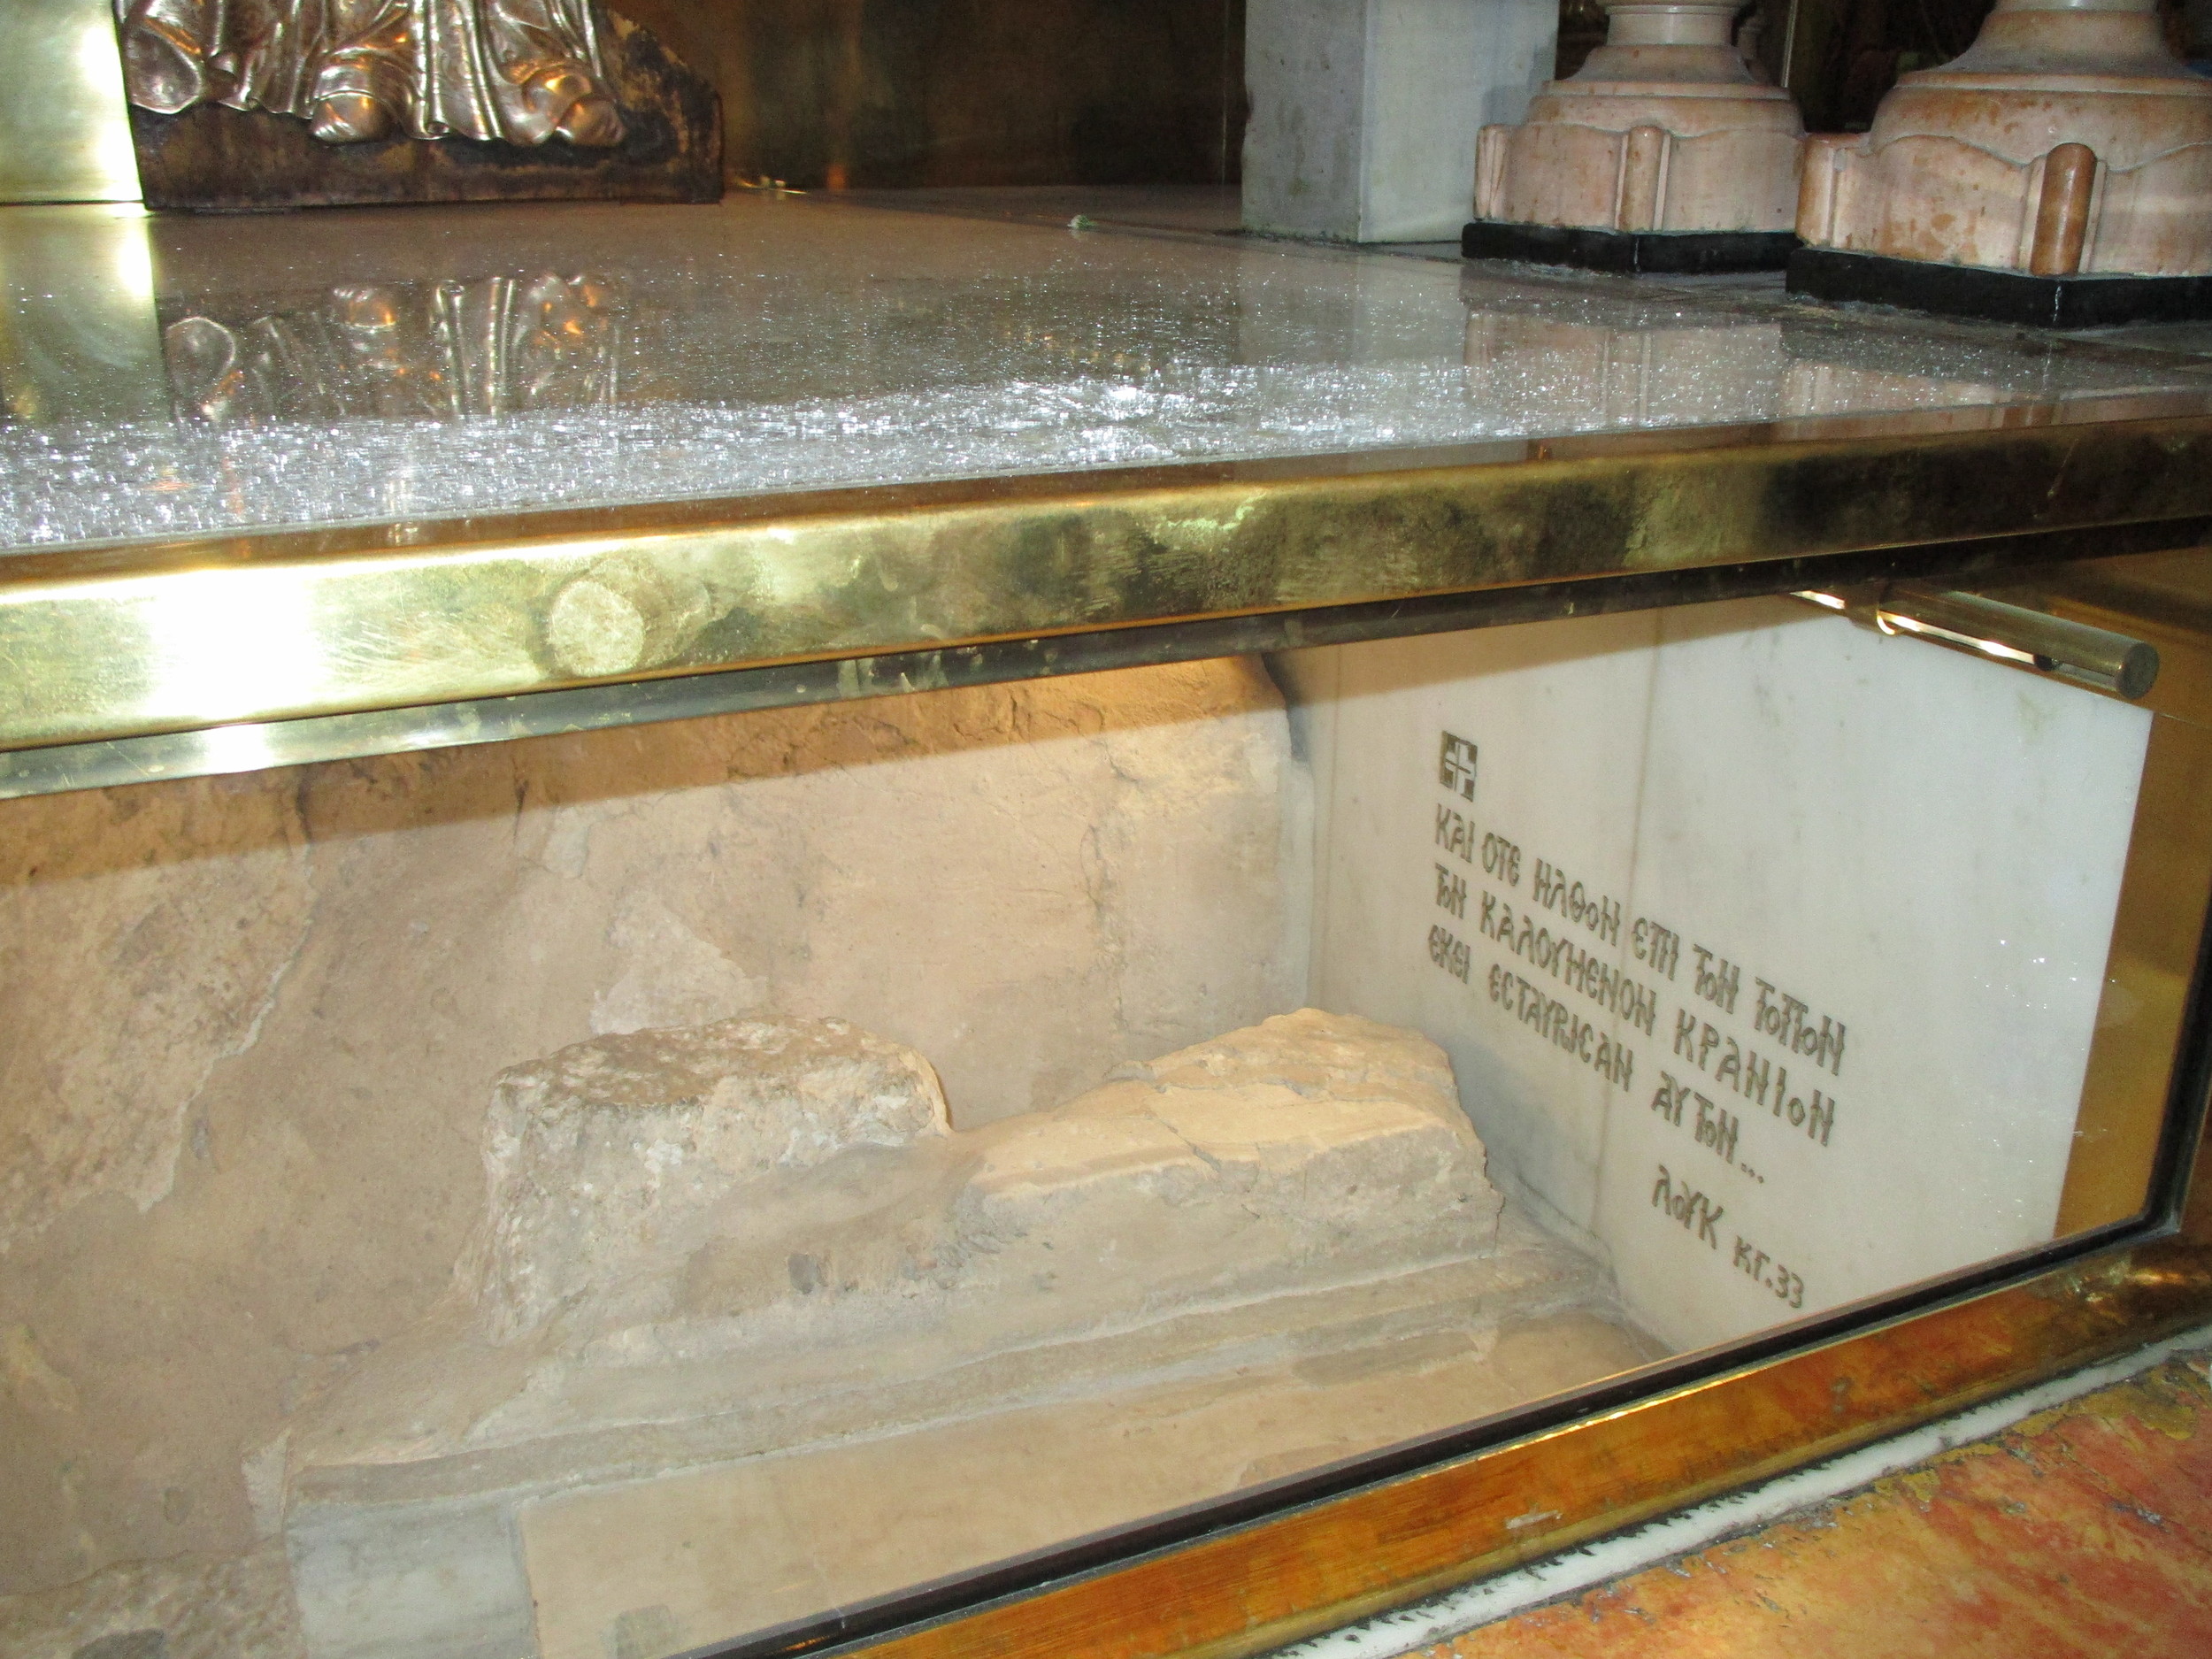  Encased in glass is part of the hill of Calvary. We were able to reach into a small portal and touch the rock. Imagine? 